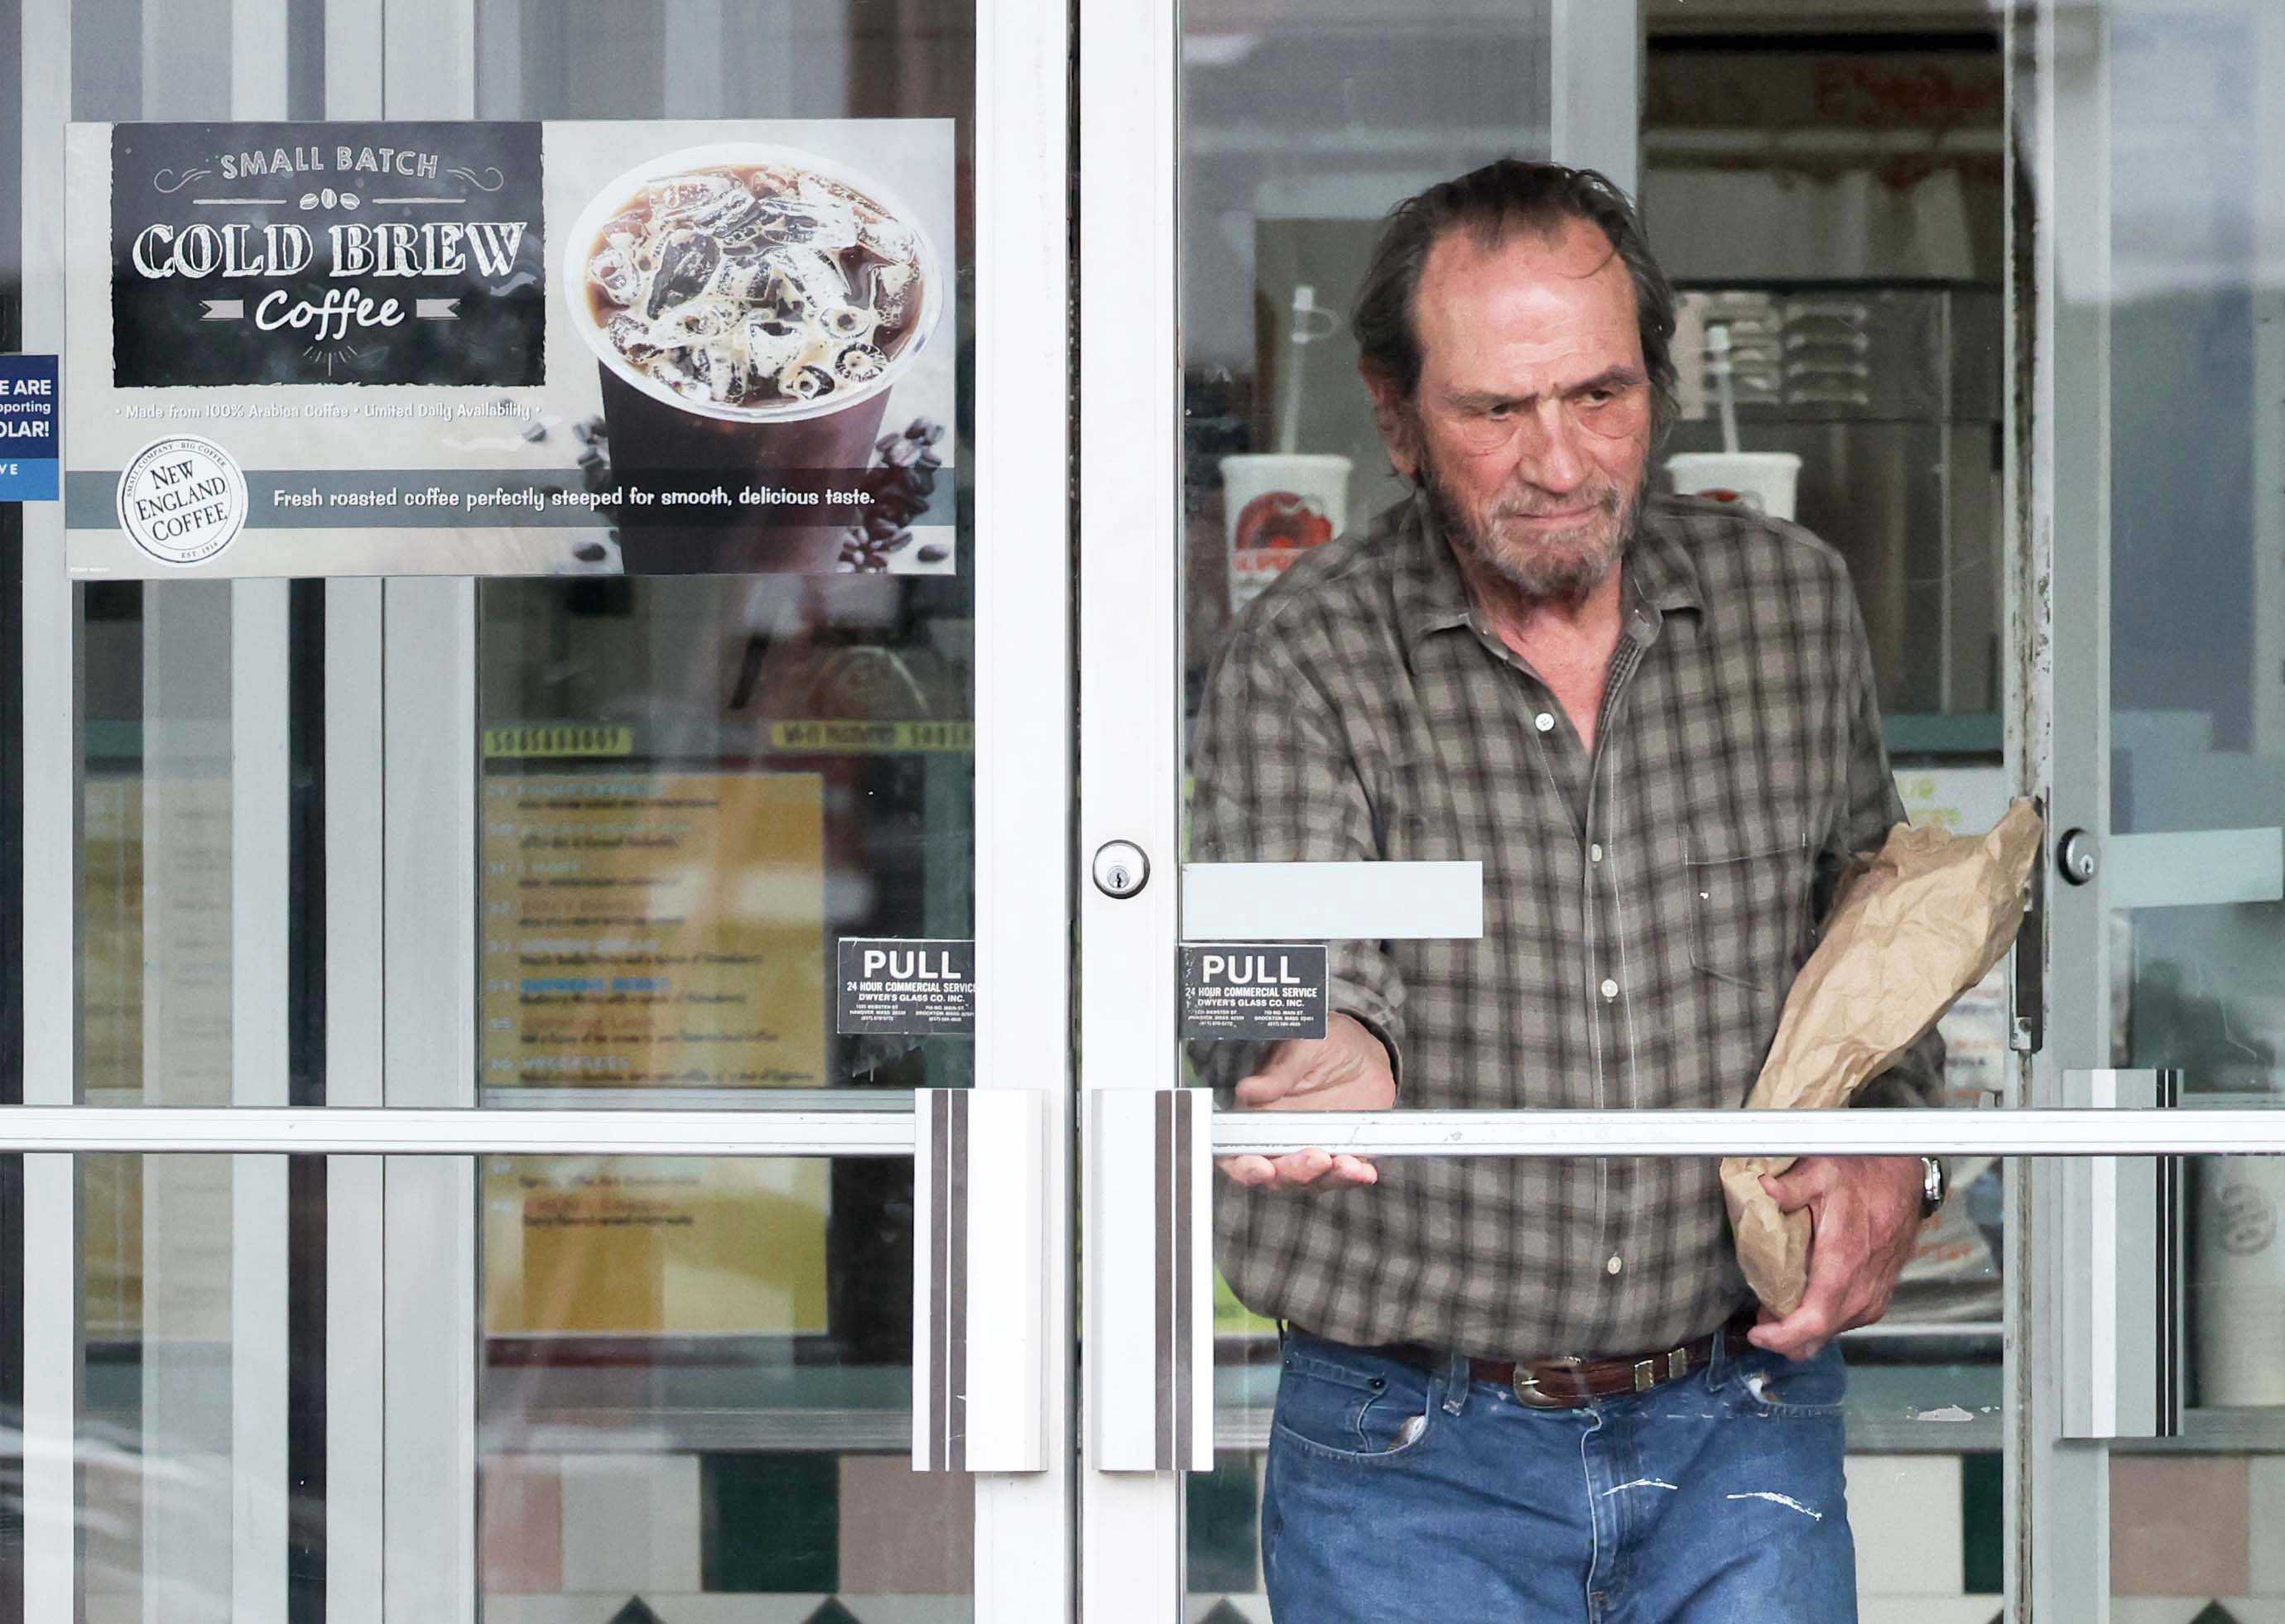 Actor Tommy Lee Jones spotted in Boston area filming new movie